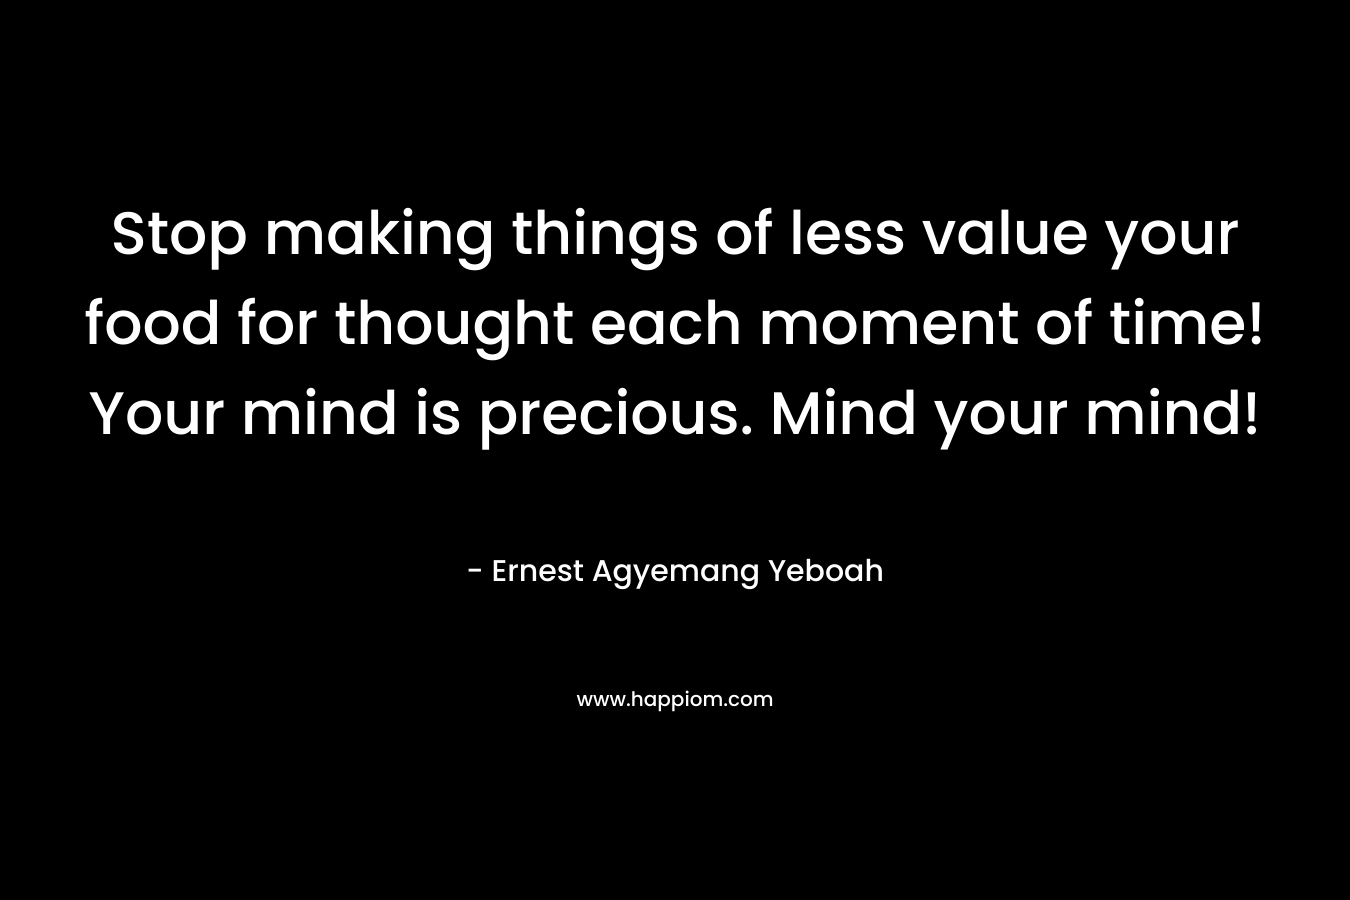 Stop making things of less value your food for thought each moment of time! Your mind is precious. Mind your mind!